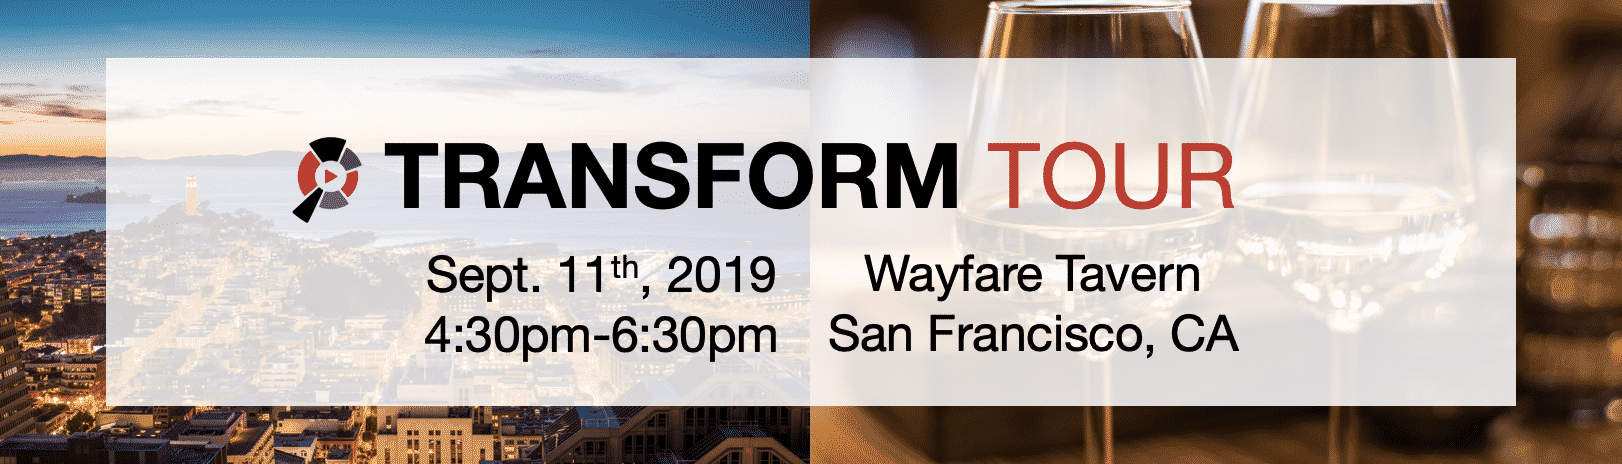 Aragon Transform Tour 3 - Transform Tour: Redefining the Customer Experience with Automation